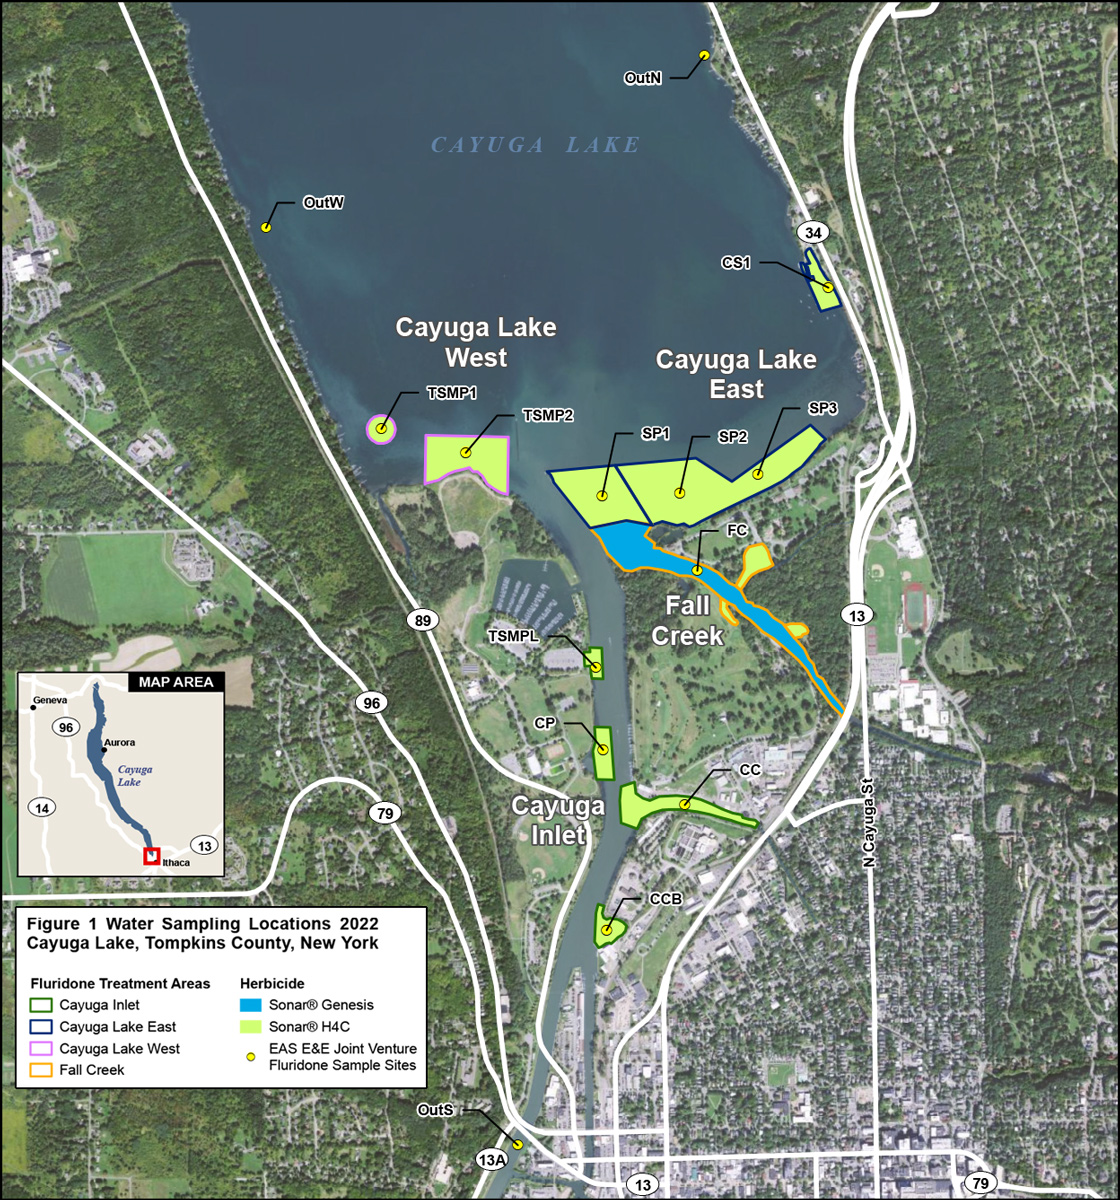 Image of the treatment sites on an satellite photo of the Cayuga Lake inlet area